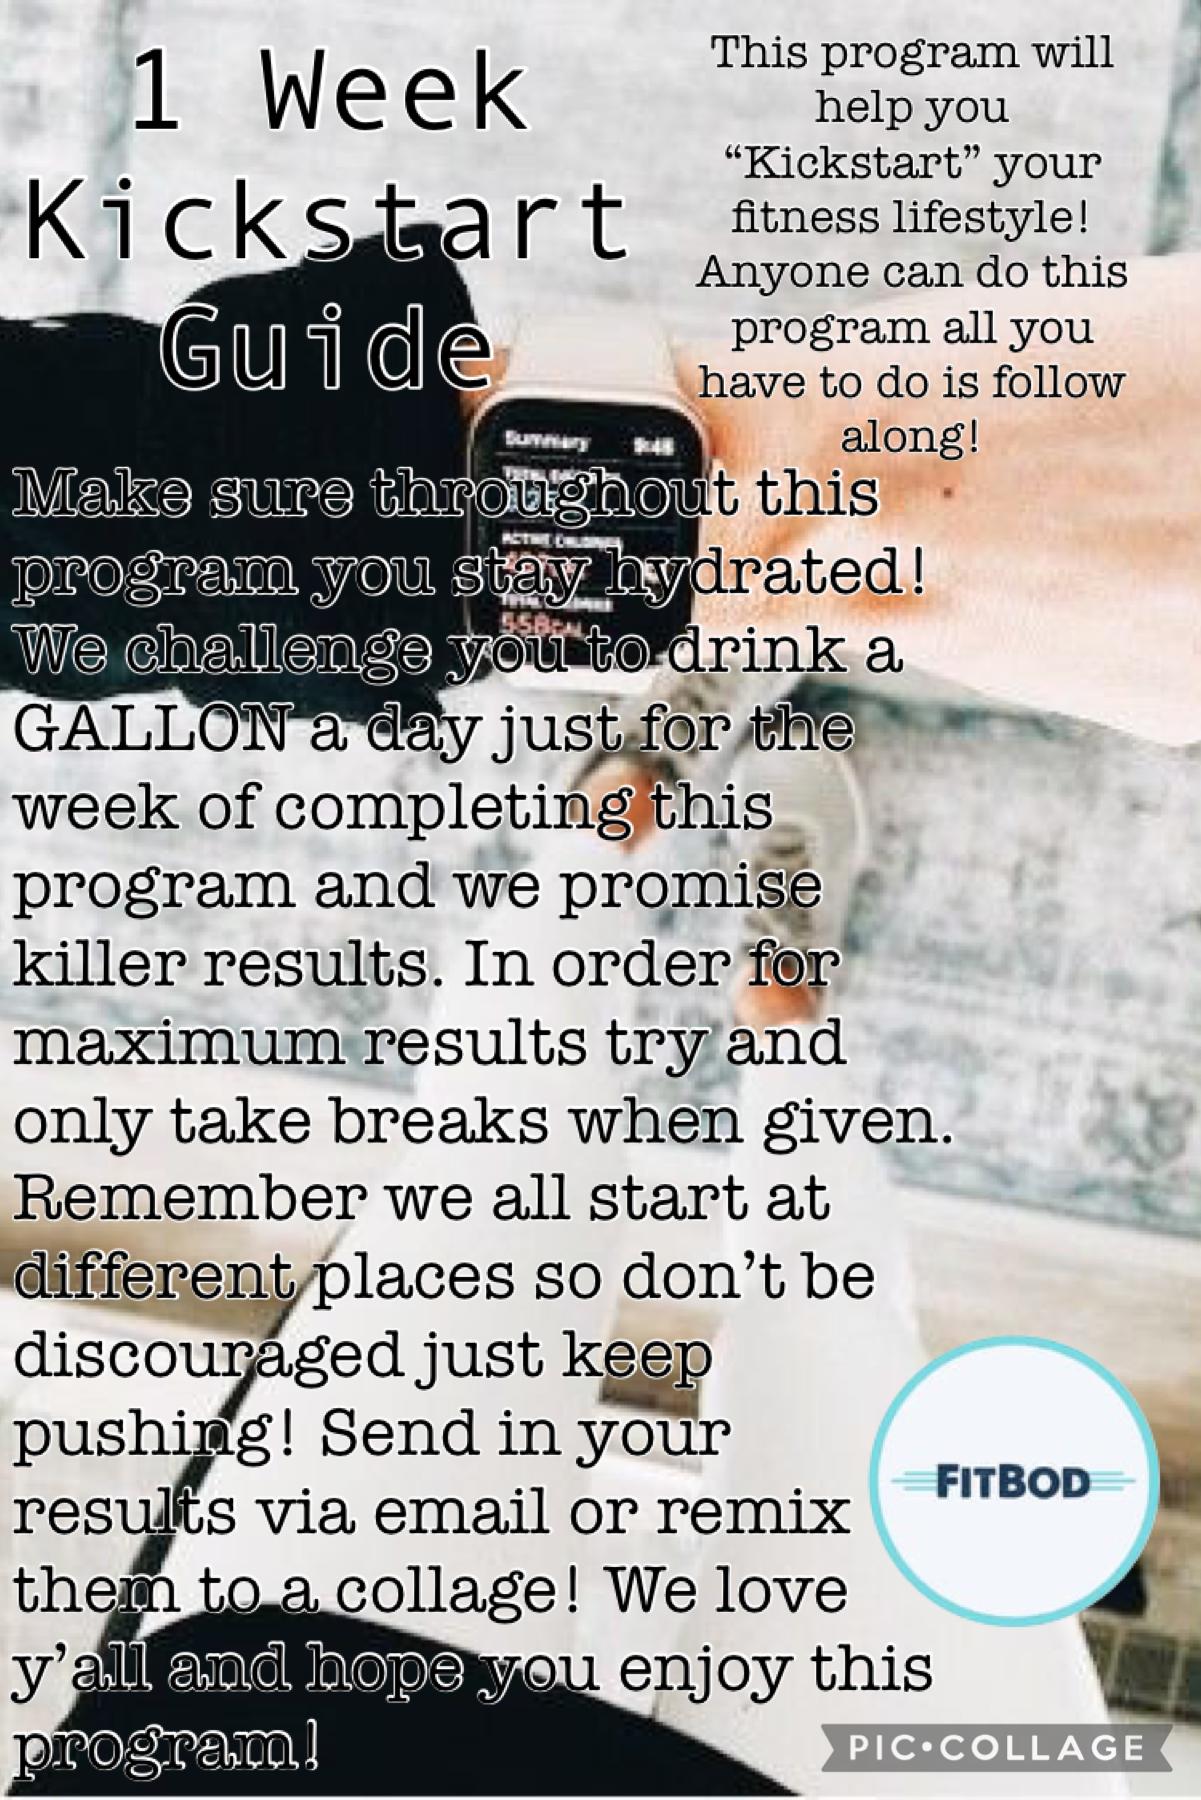 If you want to “Kickstart” a healthy lifestyle, then give this program a try! We can’t wait to see your results so send them in via email or remix your photos! Remember to drink lots of water and have fun! Stay tuned for day one! If you have any questions